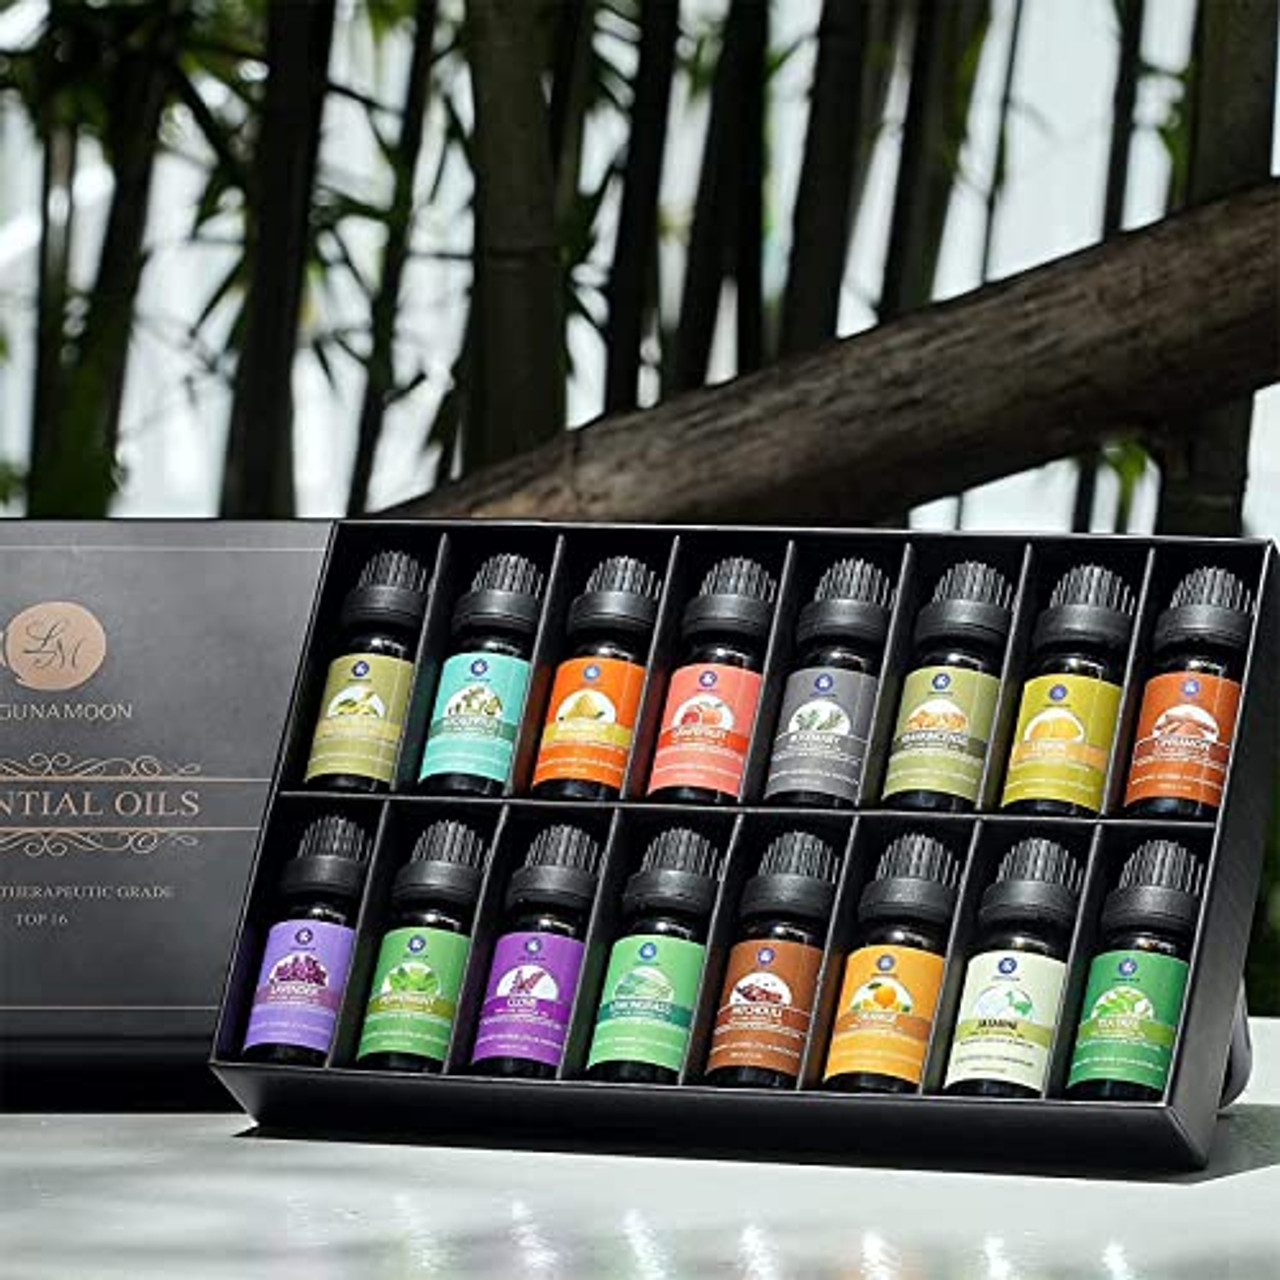 Essential Oils Top 10 Gift Set, Top 16 Oils Gfit Set for Diffuser,  Humidifier, Massage, Aromatherapy, Skin & Hair Care